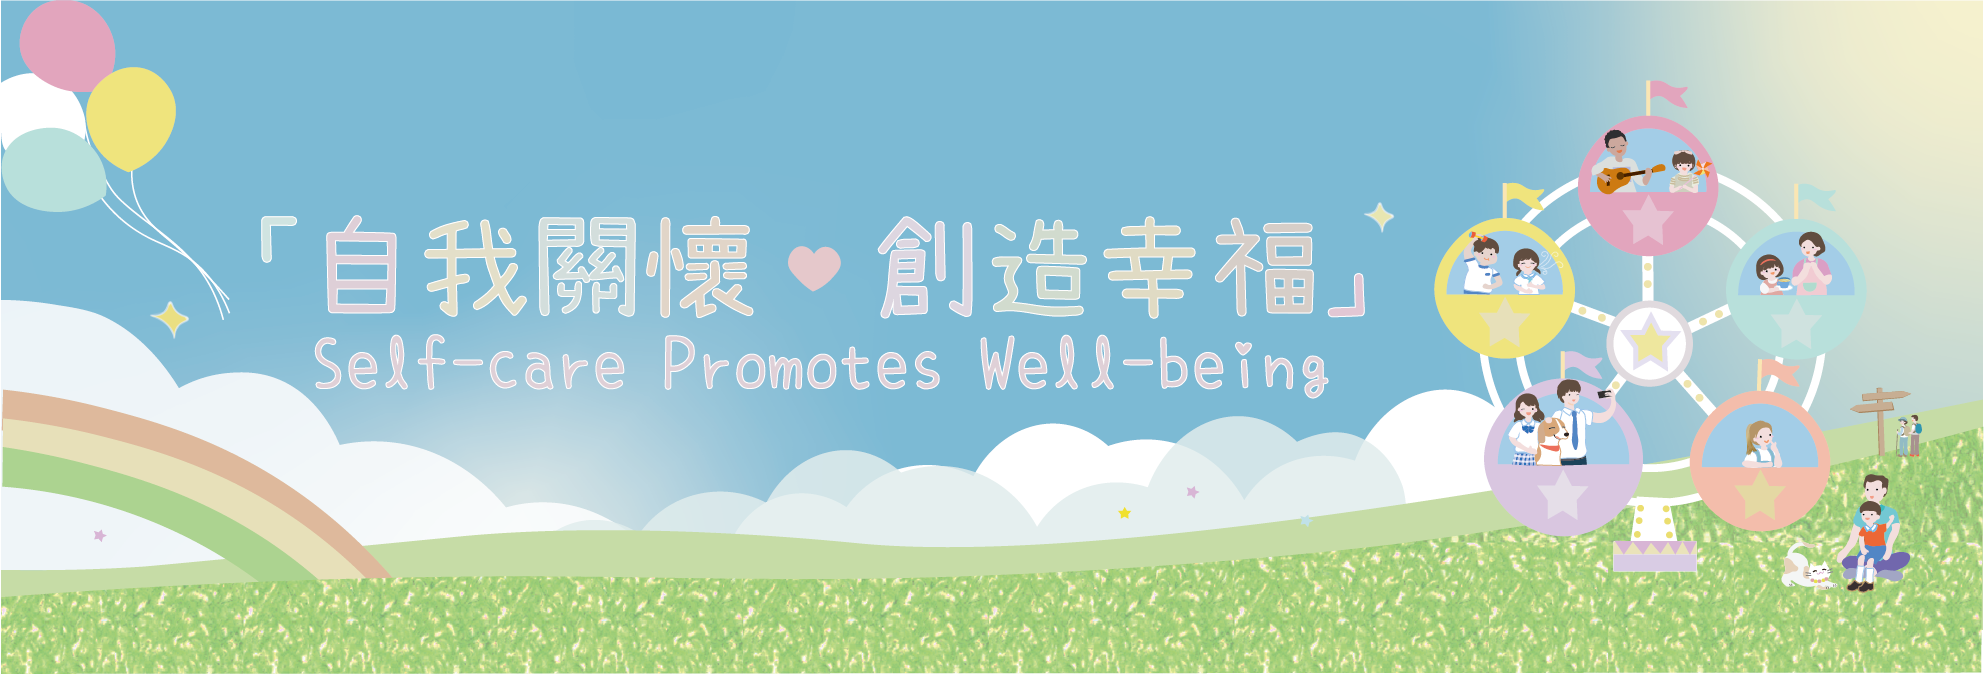 Promotional Resources on "Self-care Promotes Well-being"